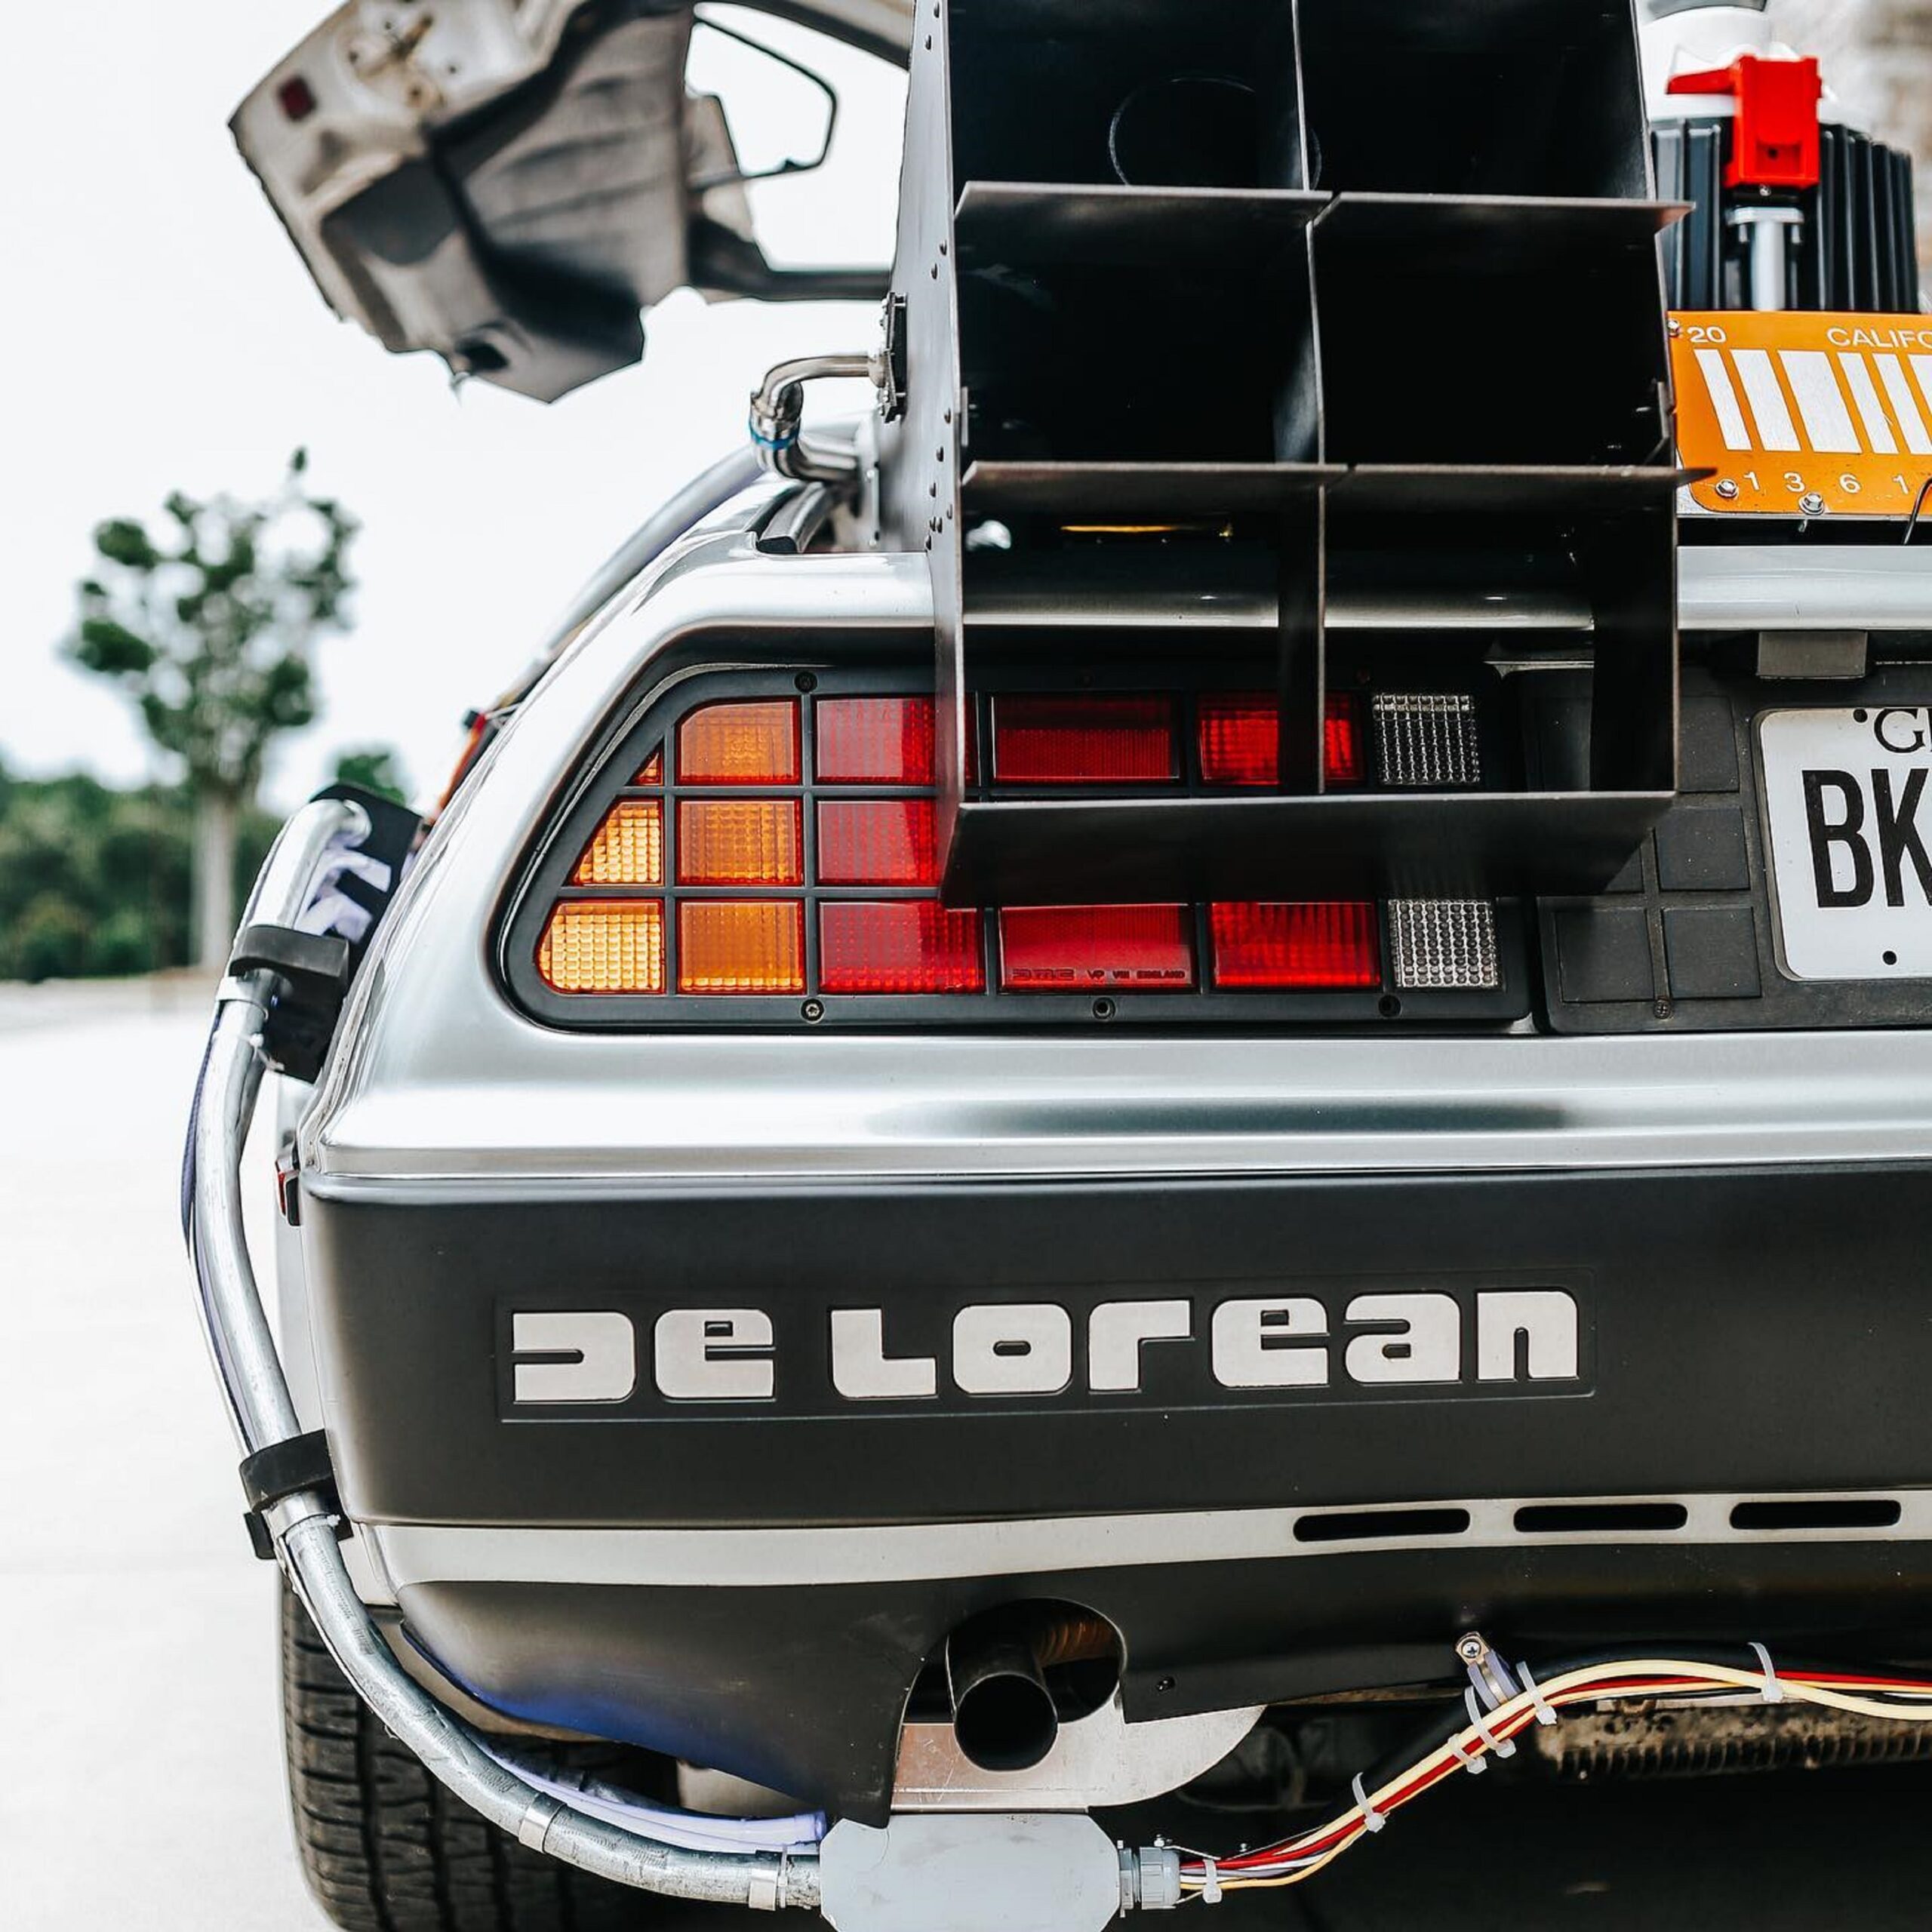 Iconic Delorean image representing the spirit of Innovation on my landing page within a blog context